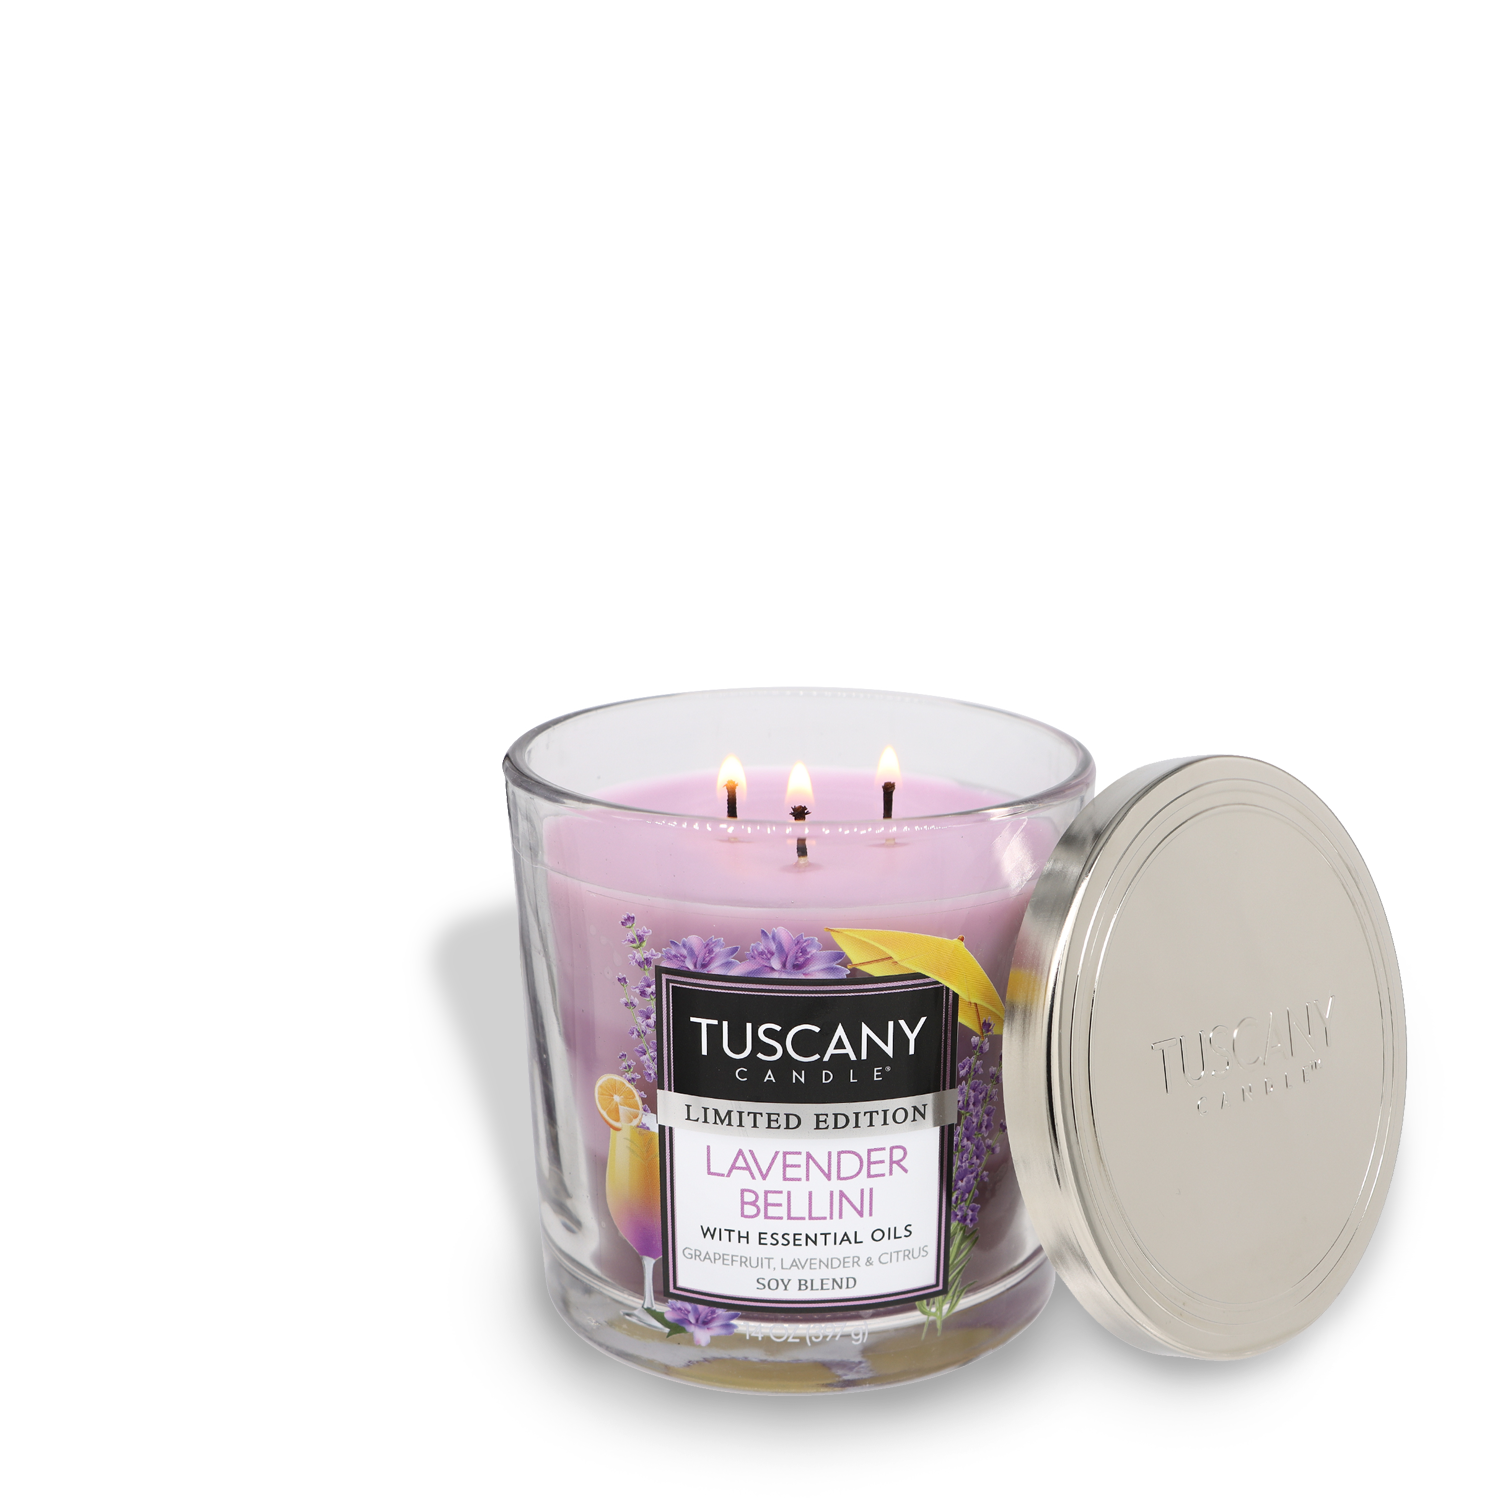 A lit three-wick Lavender Bellini long-lasting scented jar candle (14 oz) with a silver lid to the side.